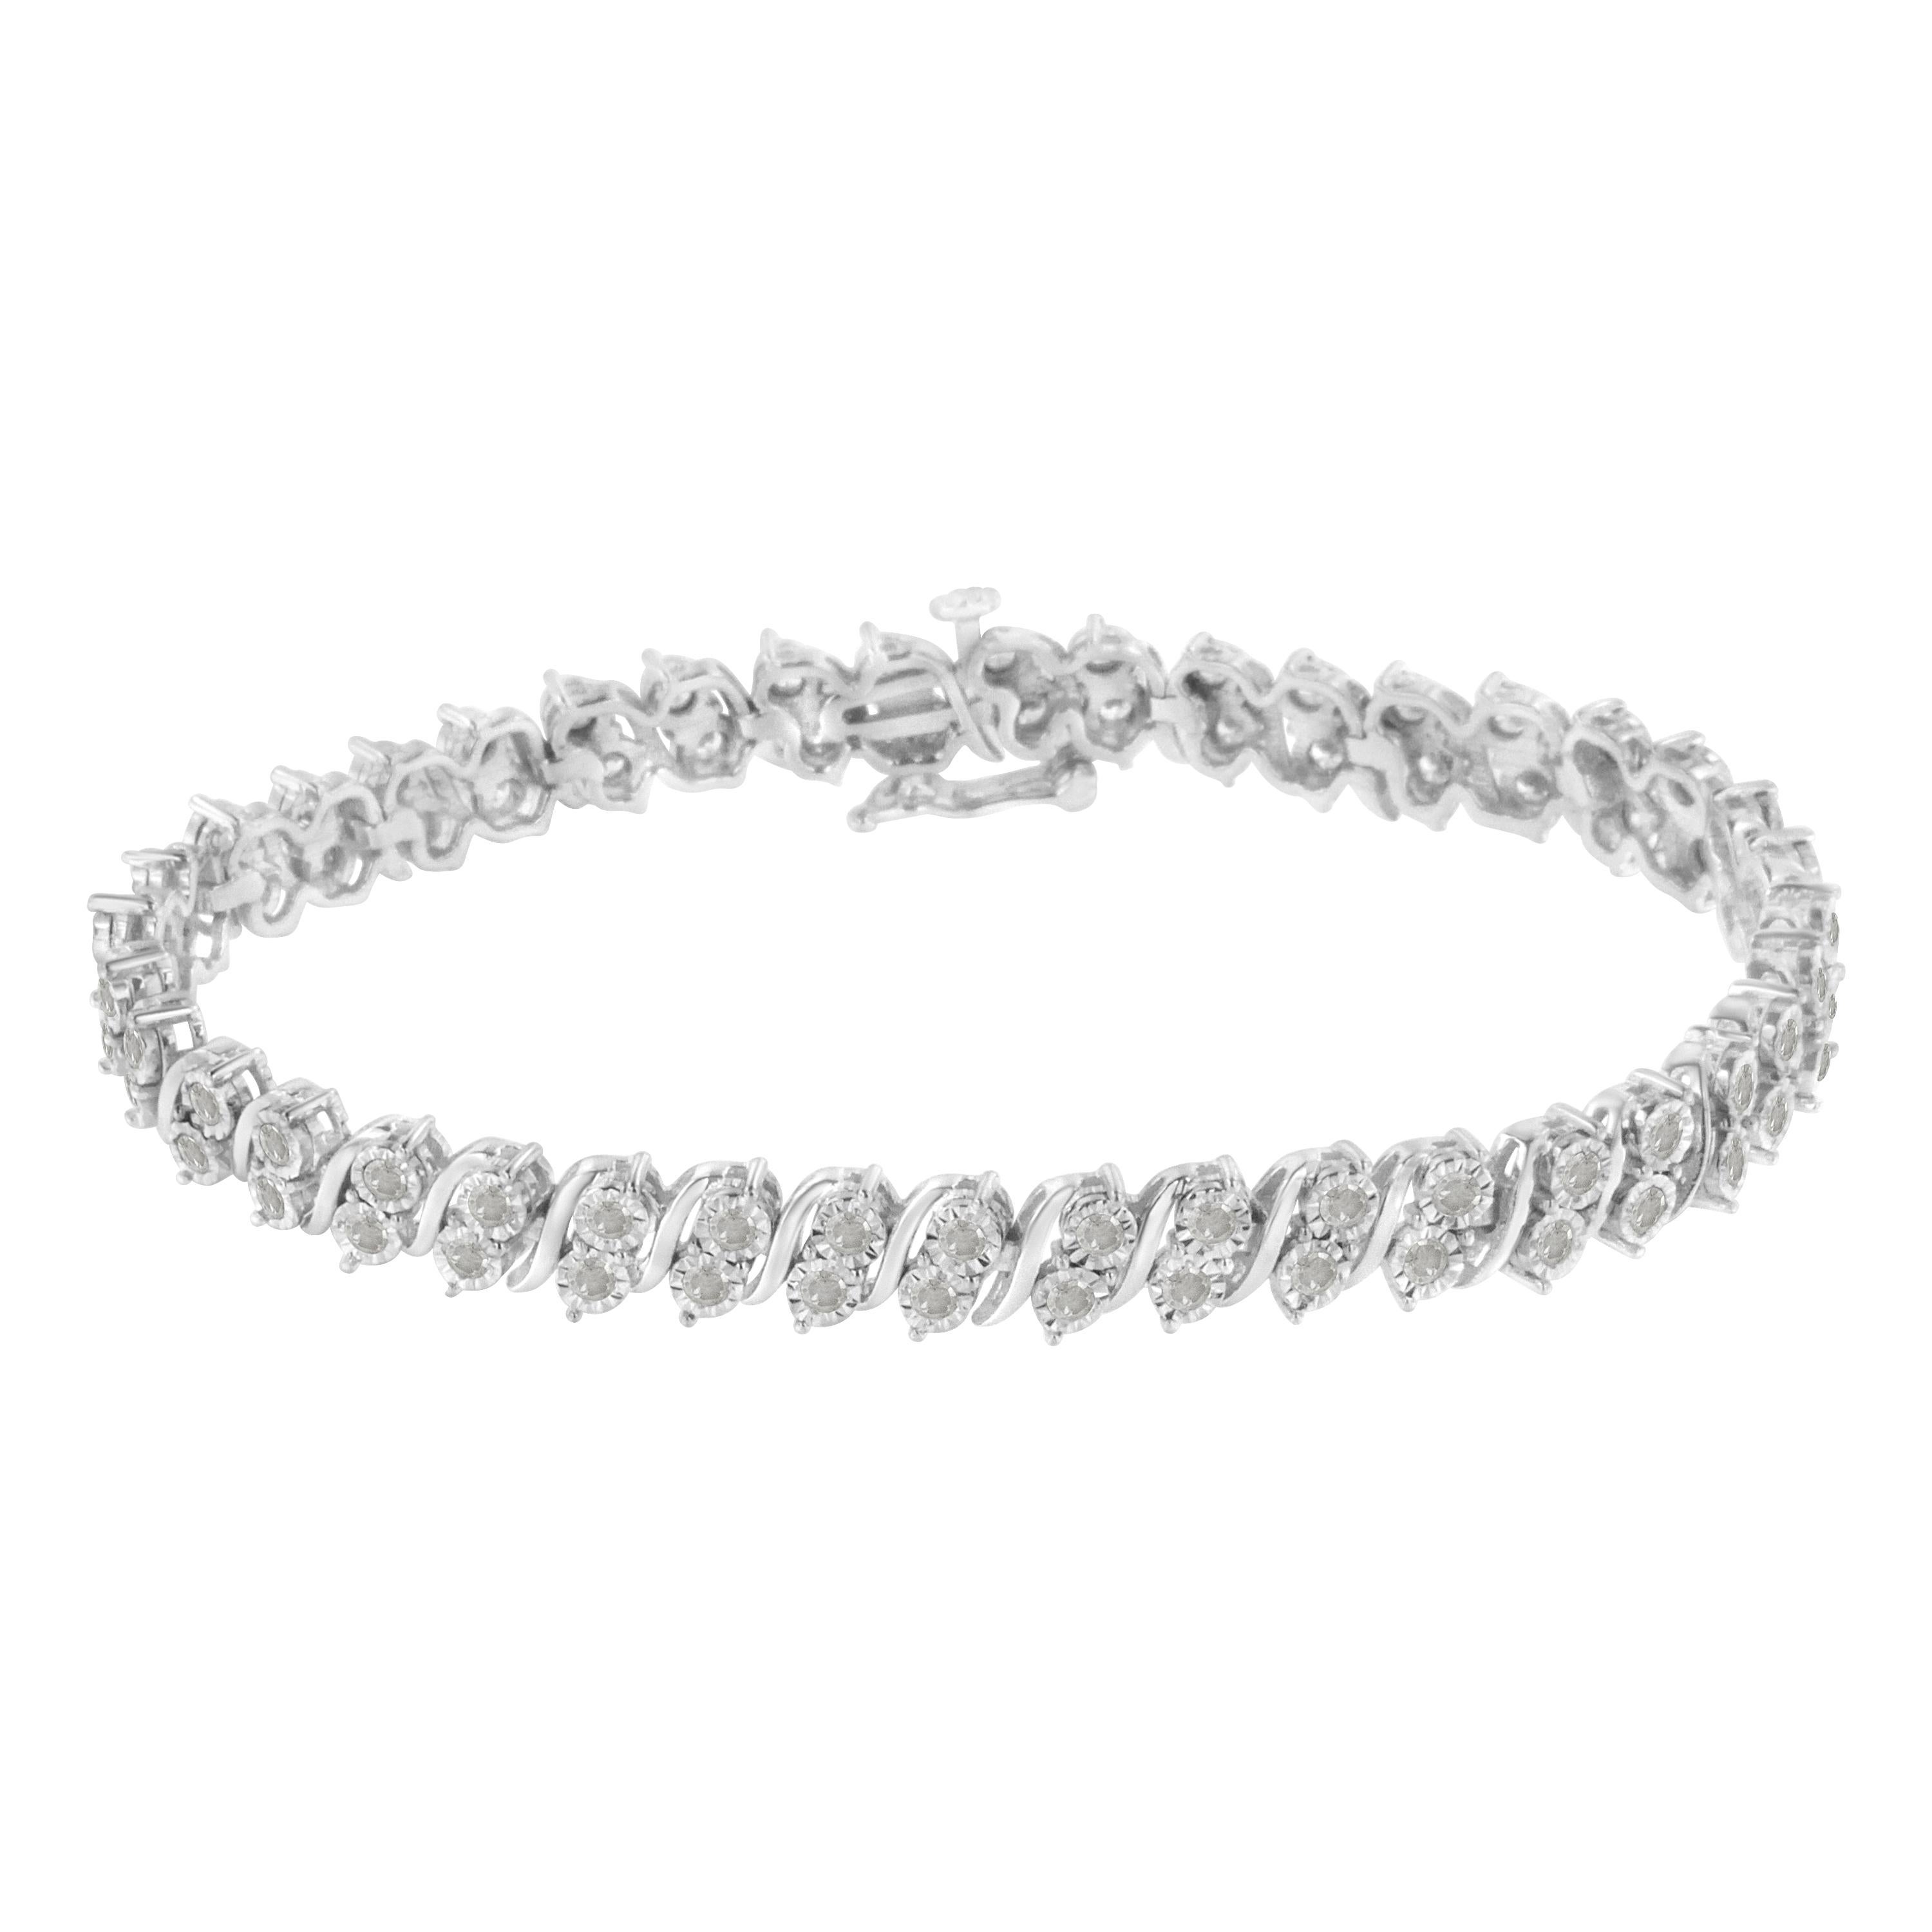 Elegant and timeless, this gorgeous sterling silver tennis bracelet features 2.0 carat total weight of round, rose cut diamonds. The tennis bracelet features S curved links with a duo of petite genuine round near colorless I-J color diamonds. These